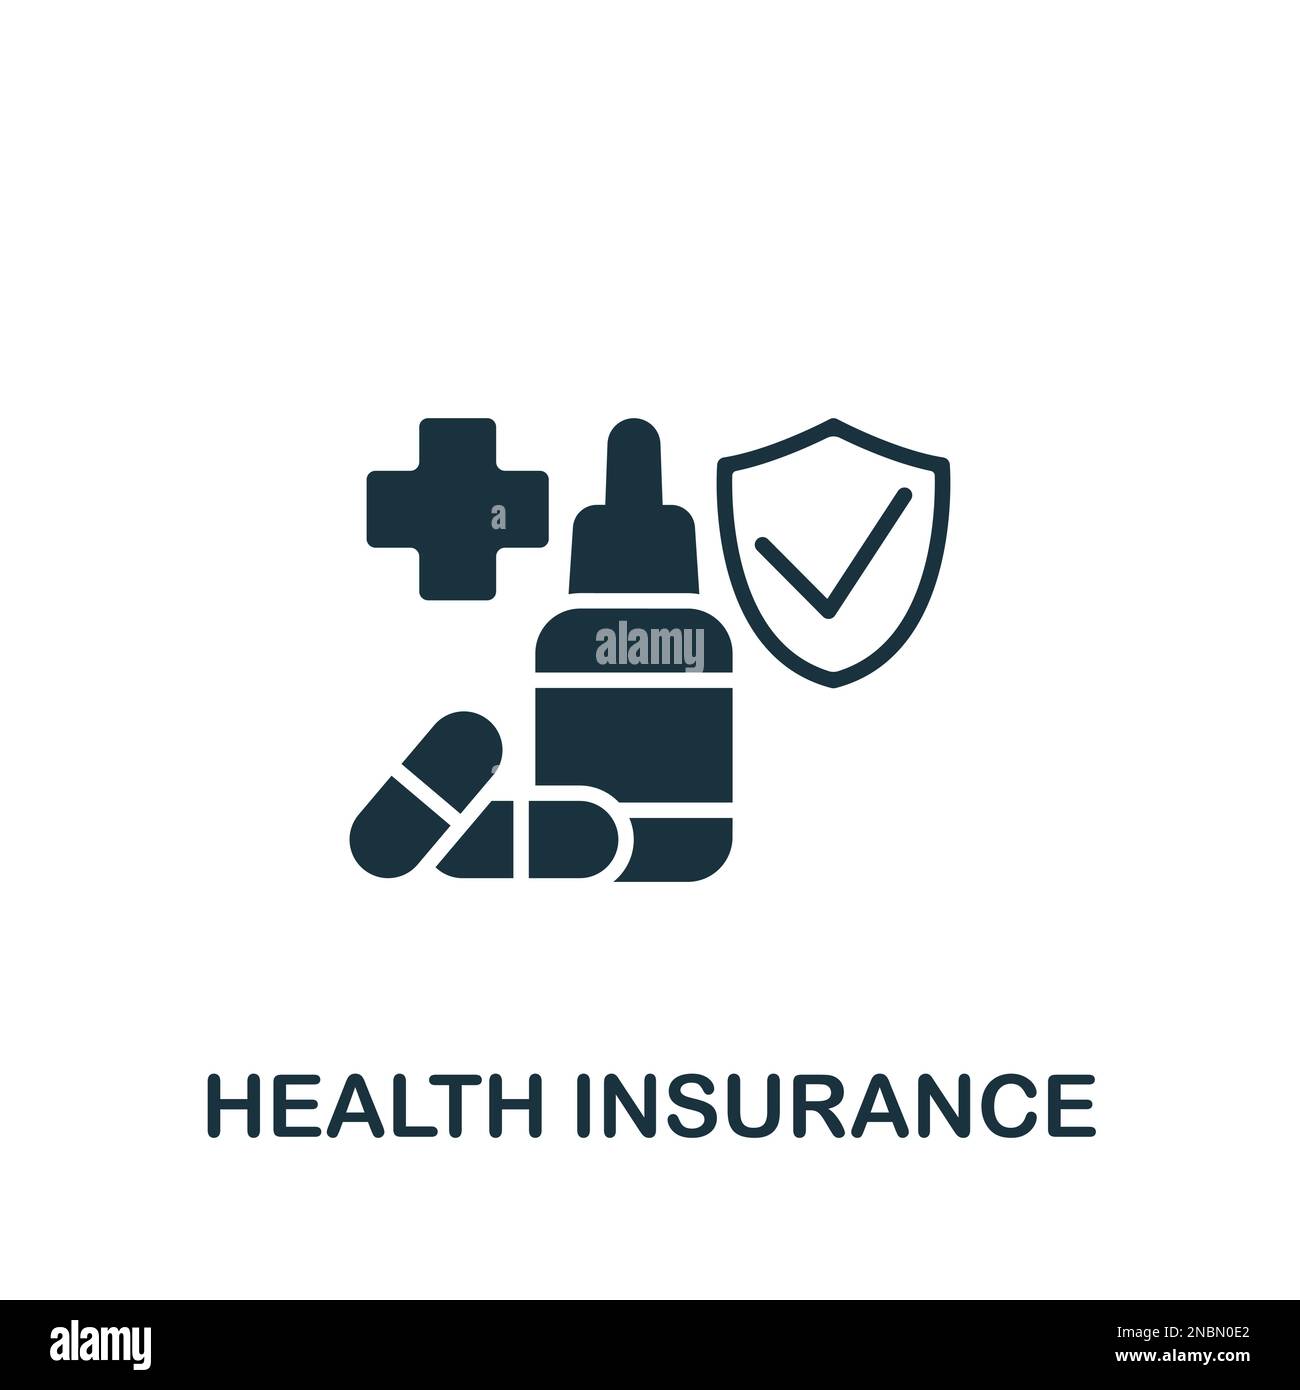 Health insurance icon. Monochrome simple sign from employee benefits ...